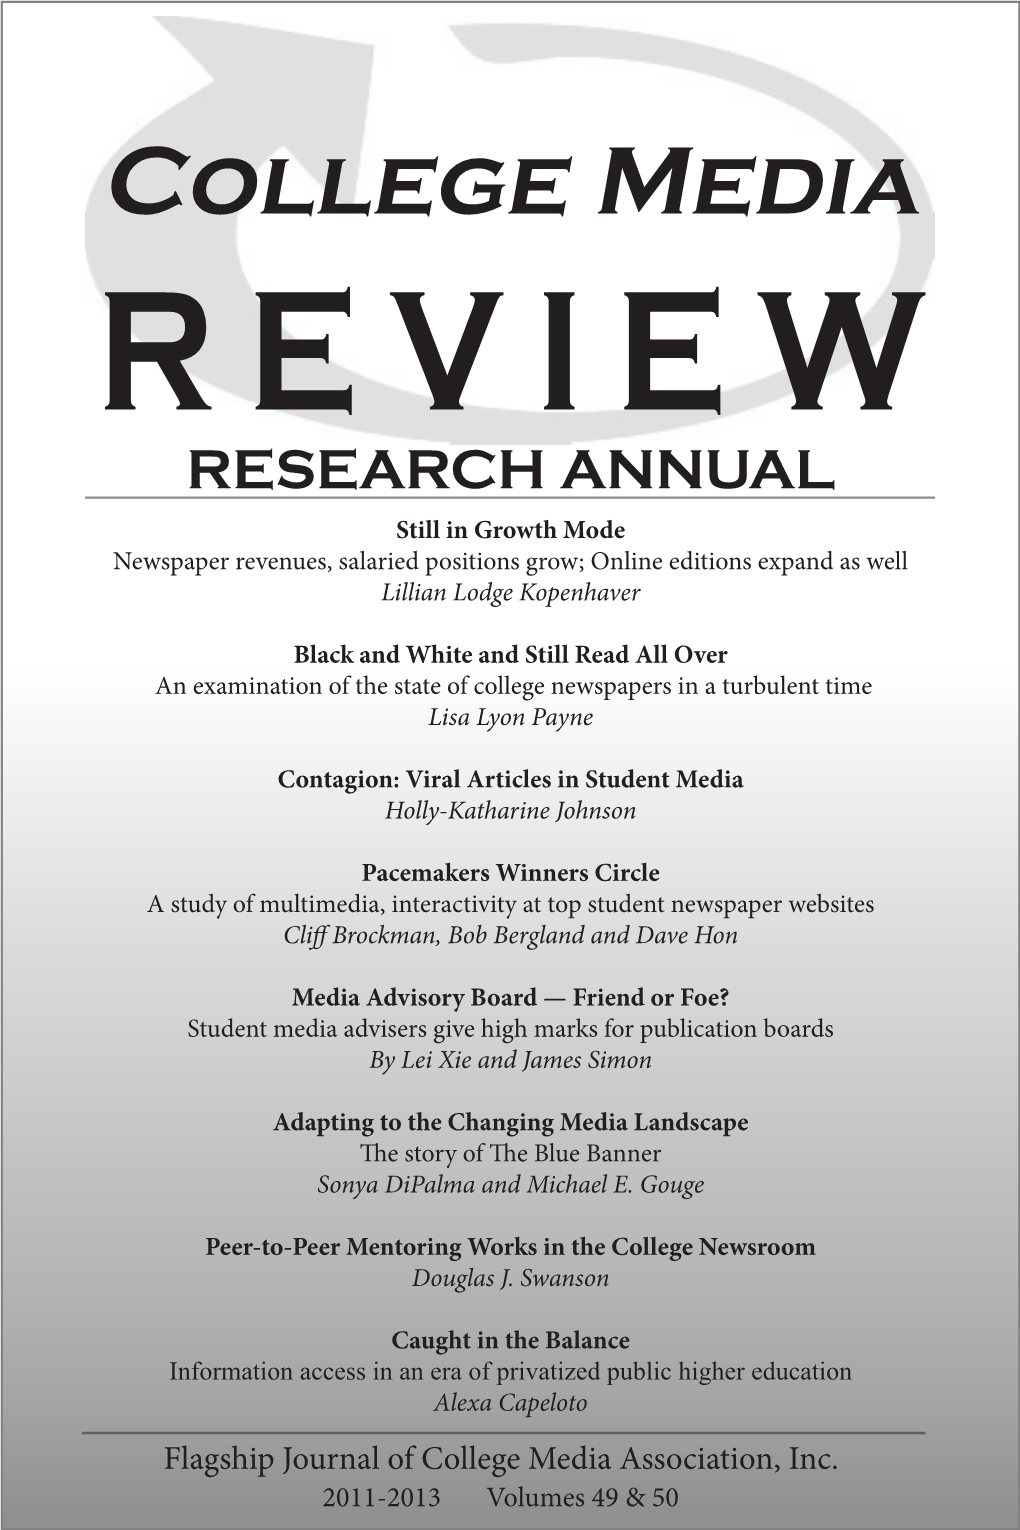 College Media REVIEW RESEARCH ANNUAL Still in Growth Mode Newspaper Revenues, Salaried Positions Grow; Online Editions Expand As Well Lillian Lodge Kopenhaver